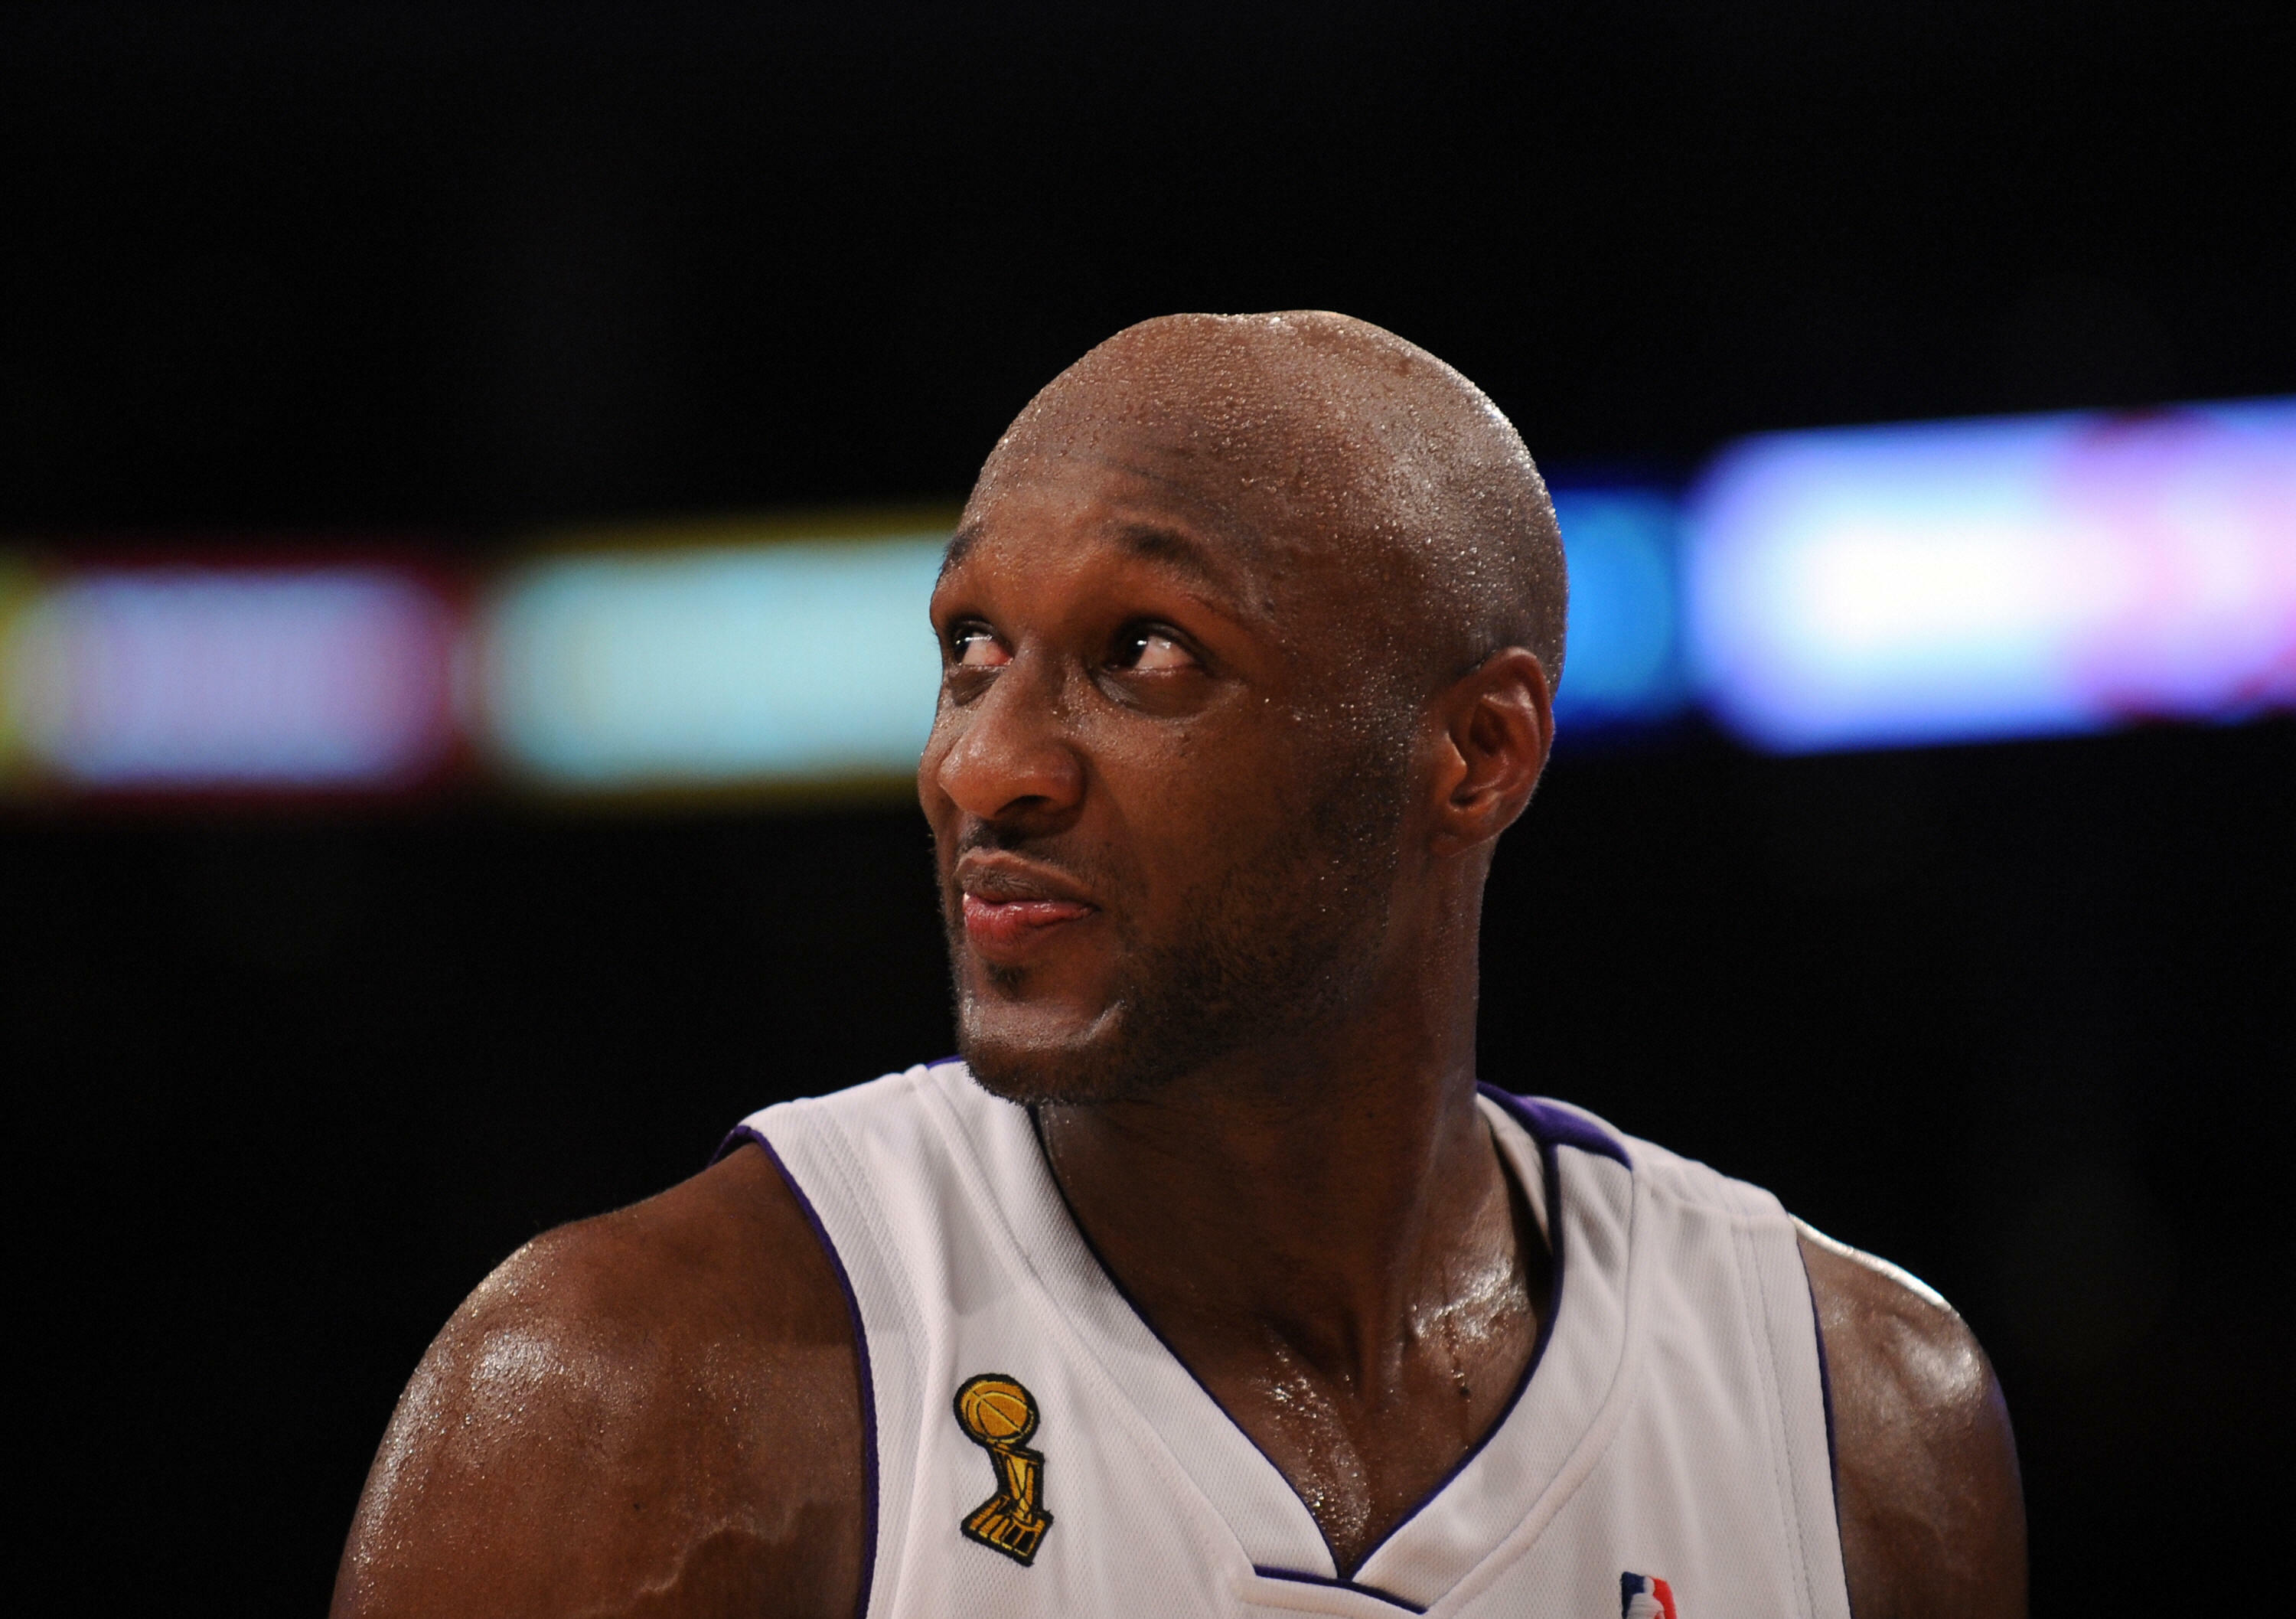 Los Angeles' Lakers forward Lamar Odom reacts during the Game 2 of the NBA final between Los Angeles Lakers and Orlando Magic at the Staples Center in Los Angeles, California, on June 7, 2009. Los Angeles Lakers won 101 - 96 and leads 2-0. AFP PHOTO / GAB